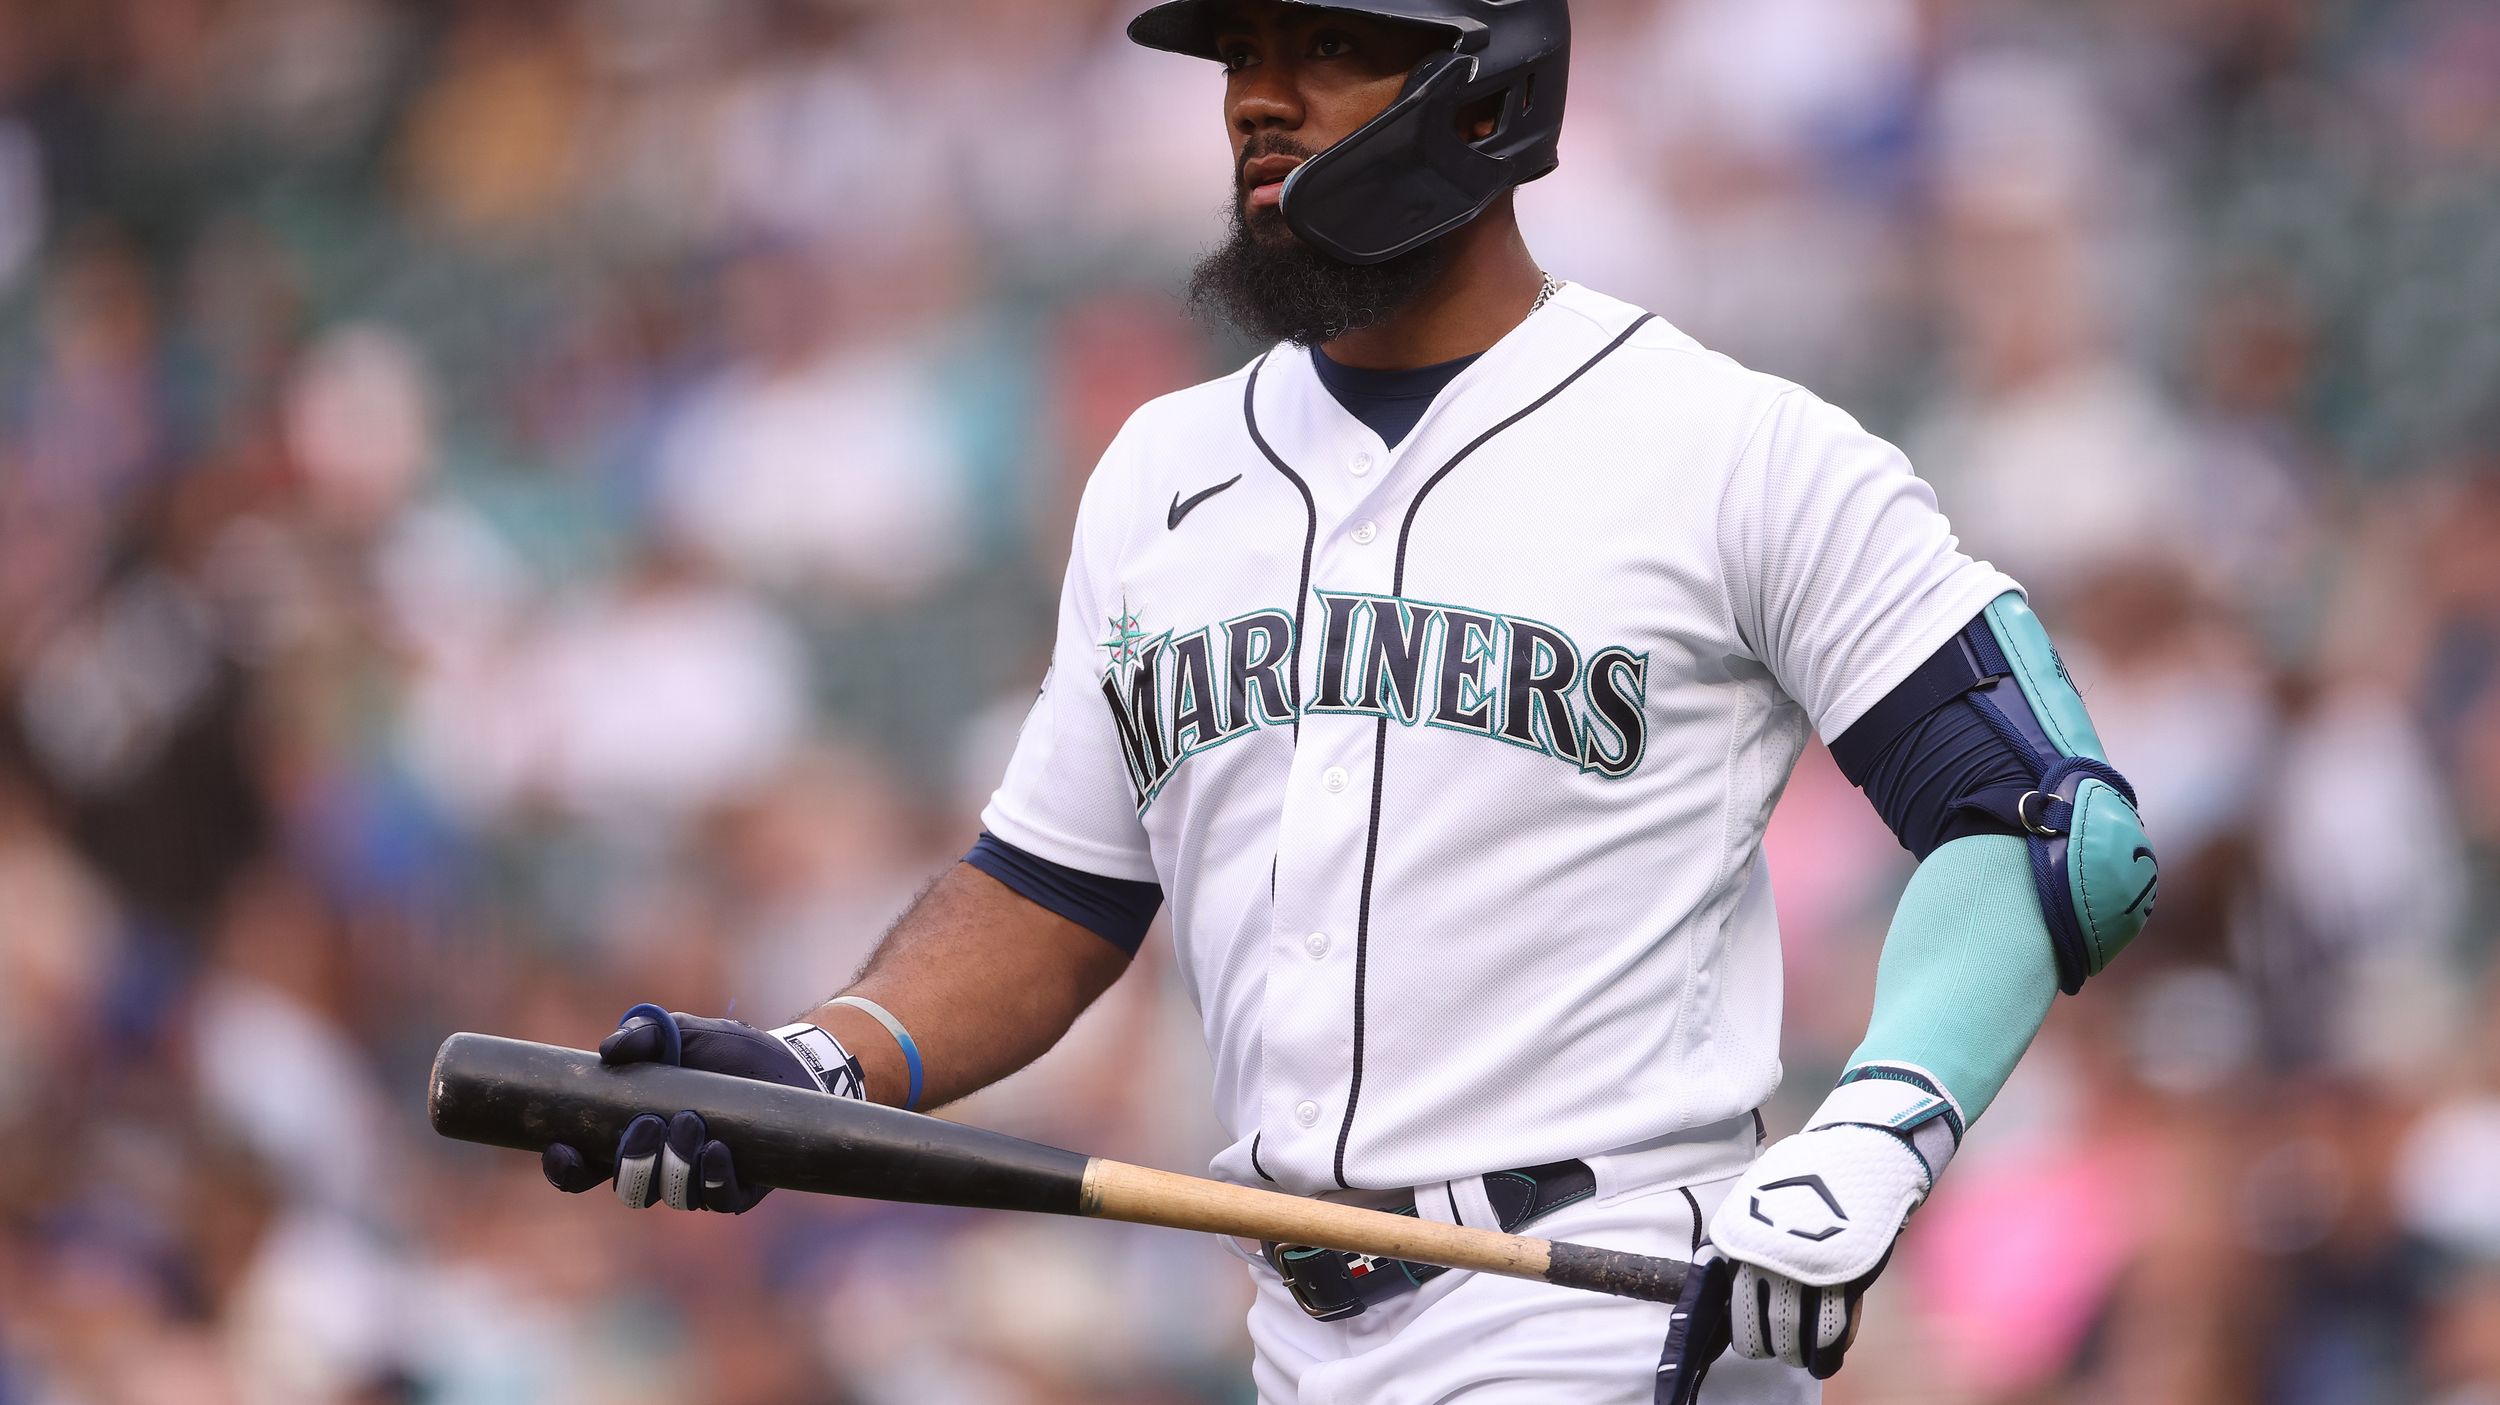 Spring Training Takeaways fans of the Mariners may have forgotten